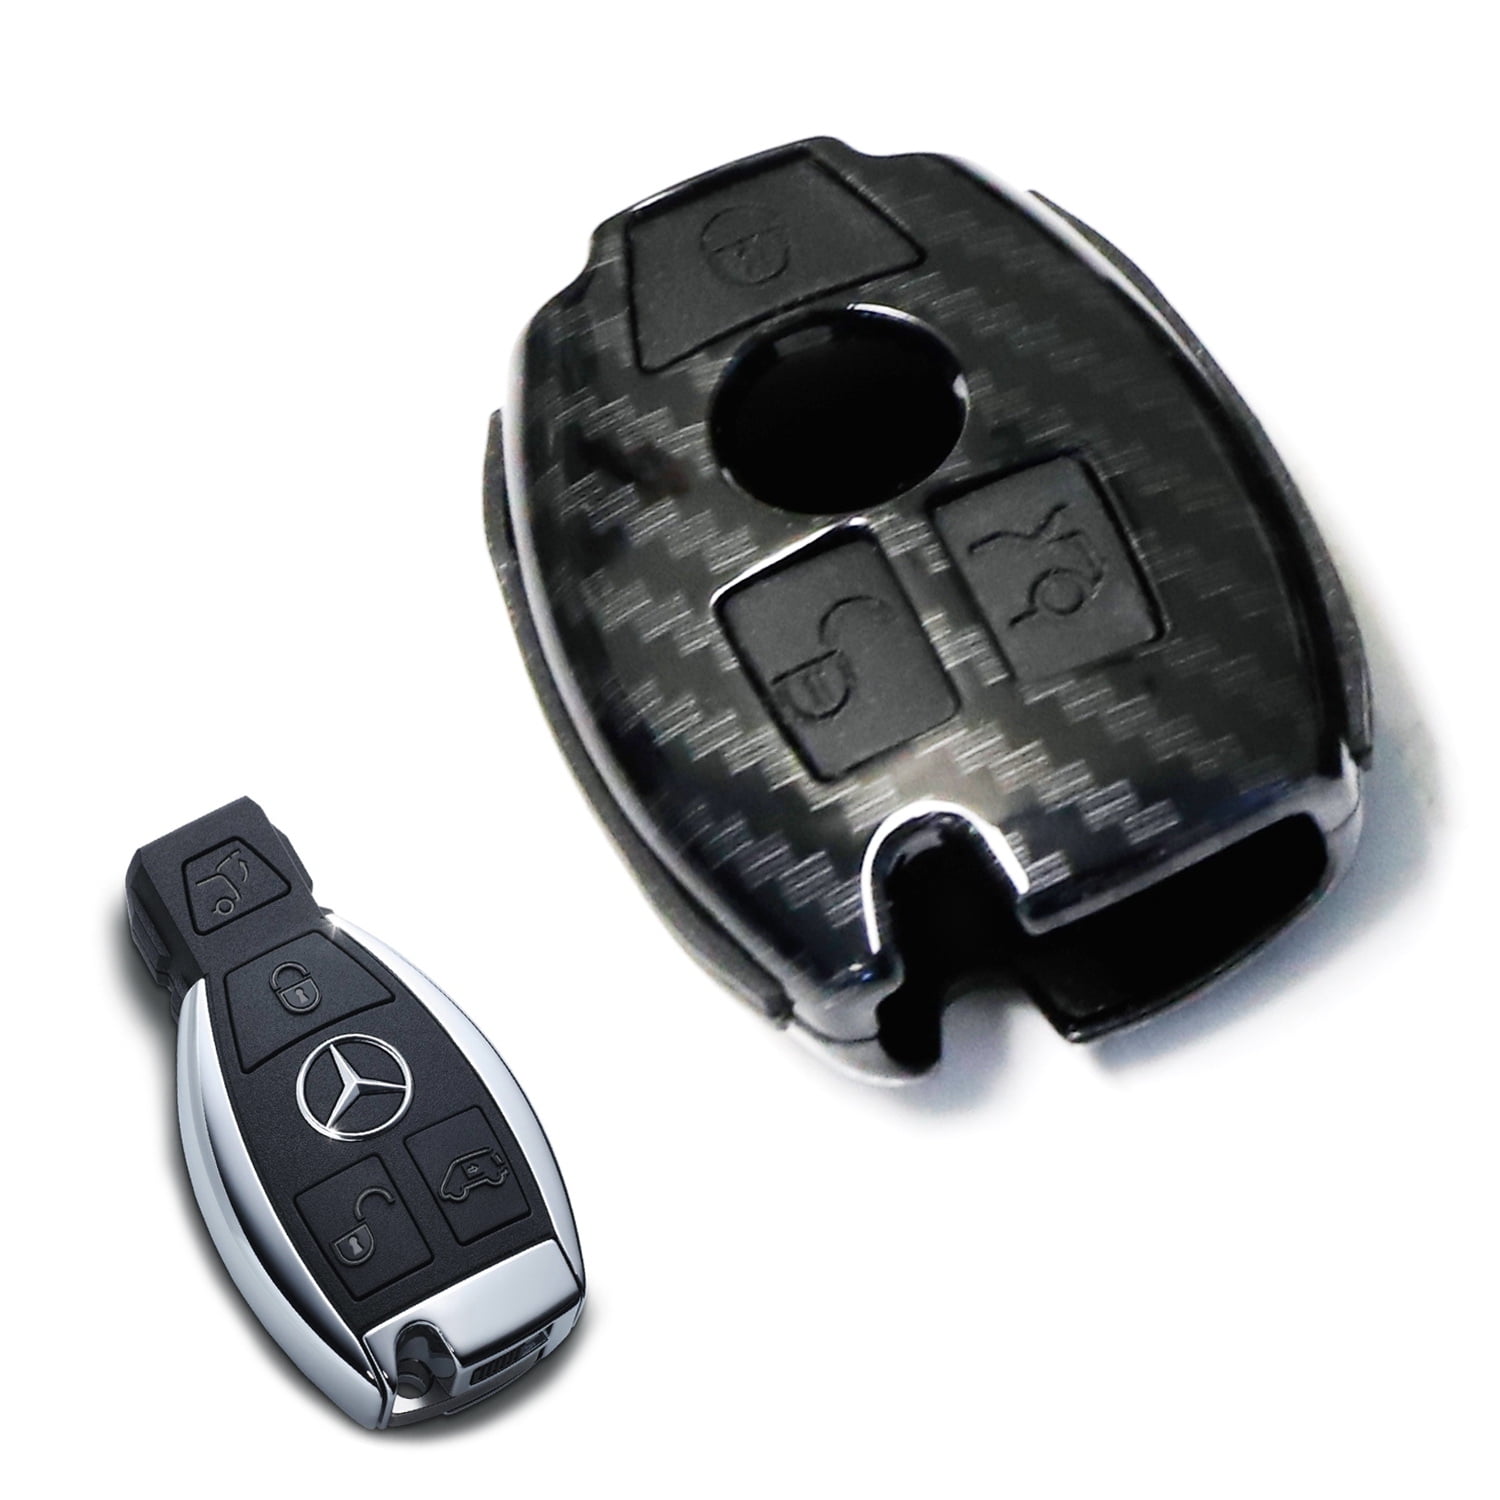 ontto for Mercedes Car Key Case Zinc Alloy Suede Leather Key Fob Cover Fit for Benz CLA CLK CLS GLA GLC GLK A B C E S W203 W210 W211 Keyring Holder Smart Key Cover Shell Protector Black